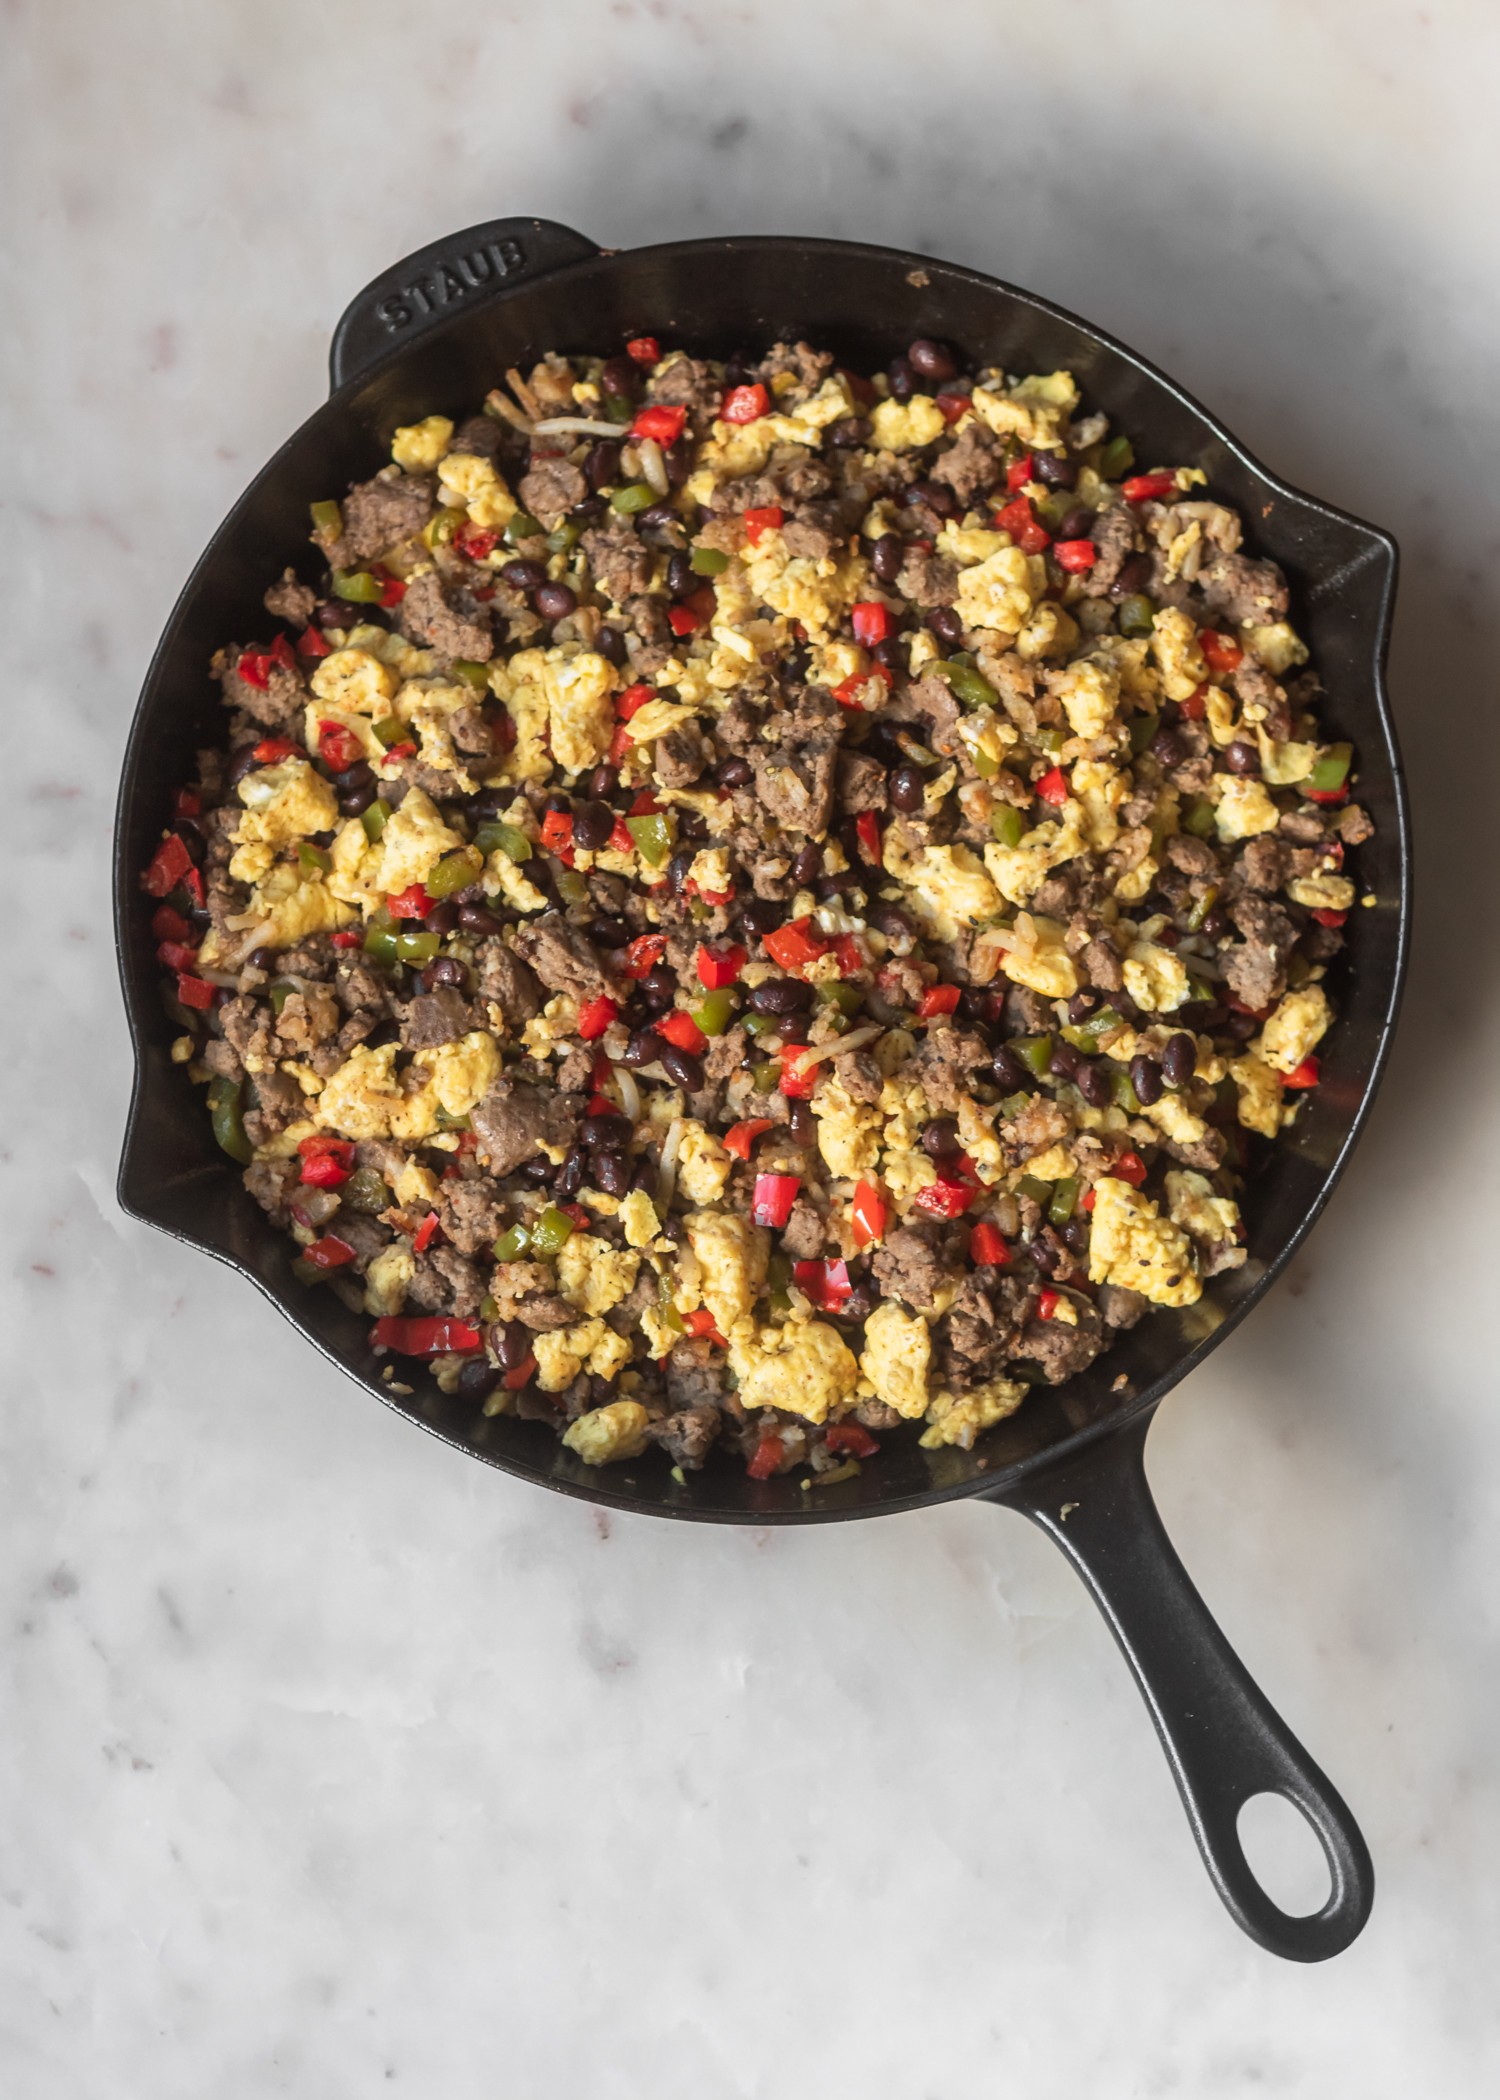 An overhead shot of a black Staub pan filled with eggs, sausage, beans, and vegetables on a light grey counter.